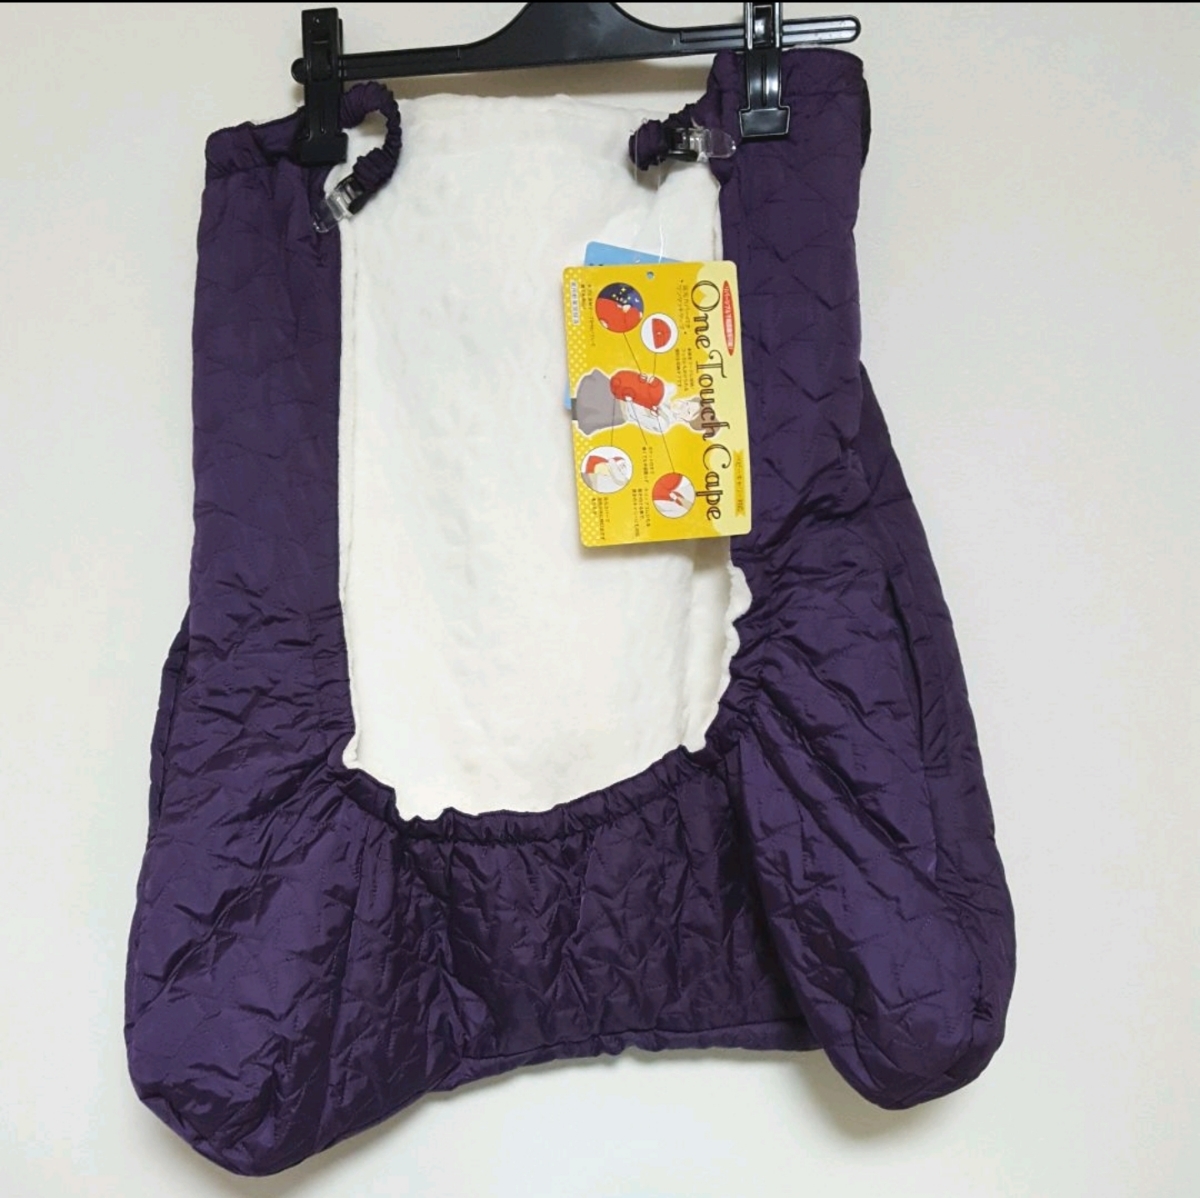 [ postage 510 jpy ] new goods pair with cover one touch cape protection against cold purple star pattern quilting goods for baby water-repellent 4190 jpy. goods #tnftnf